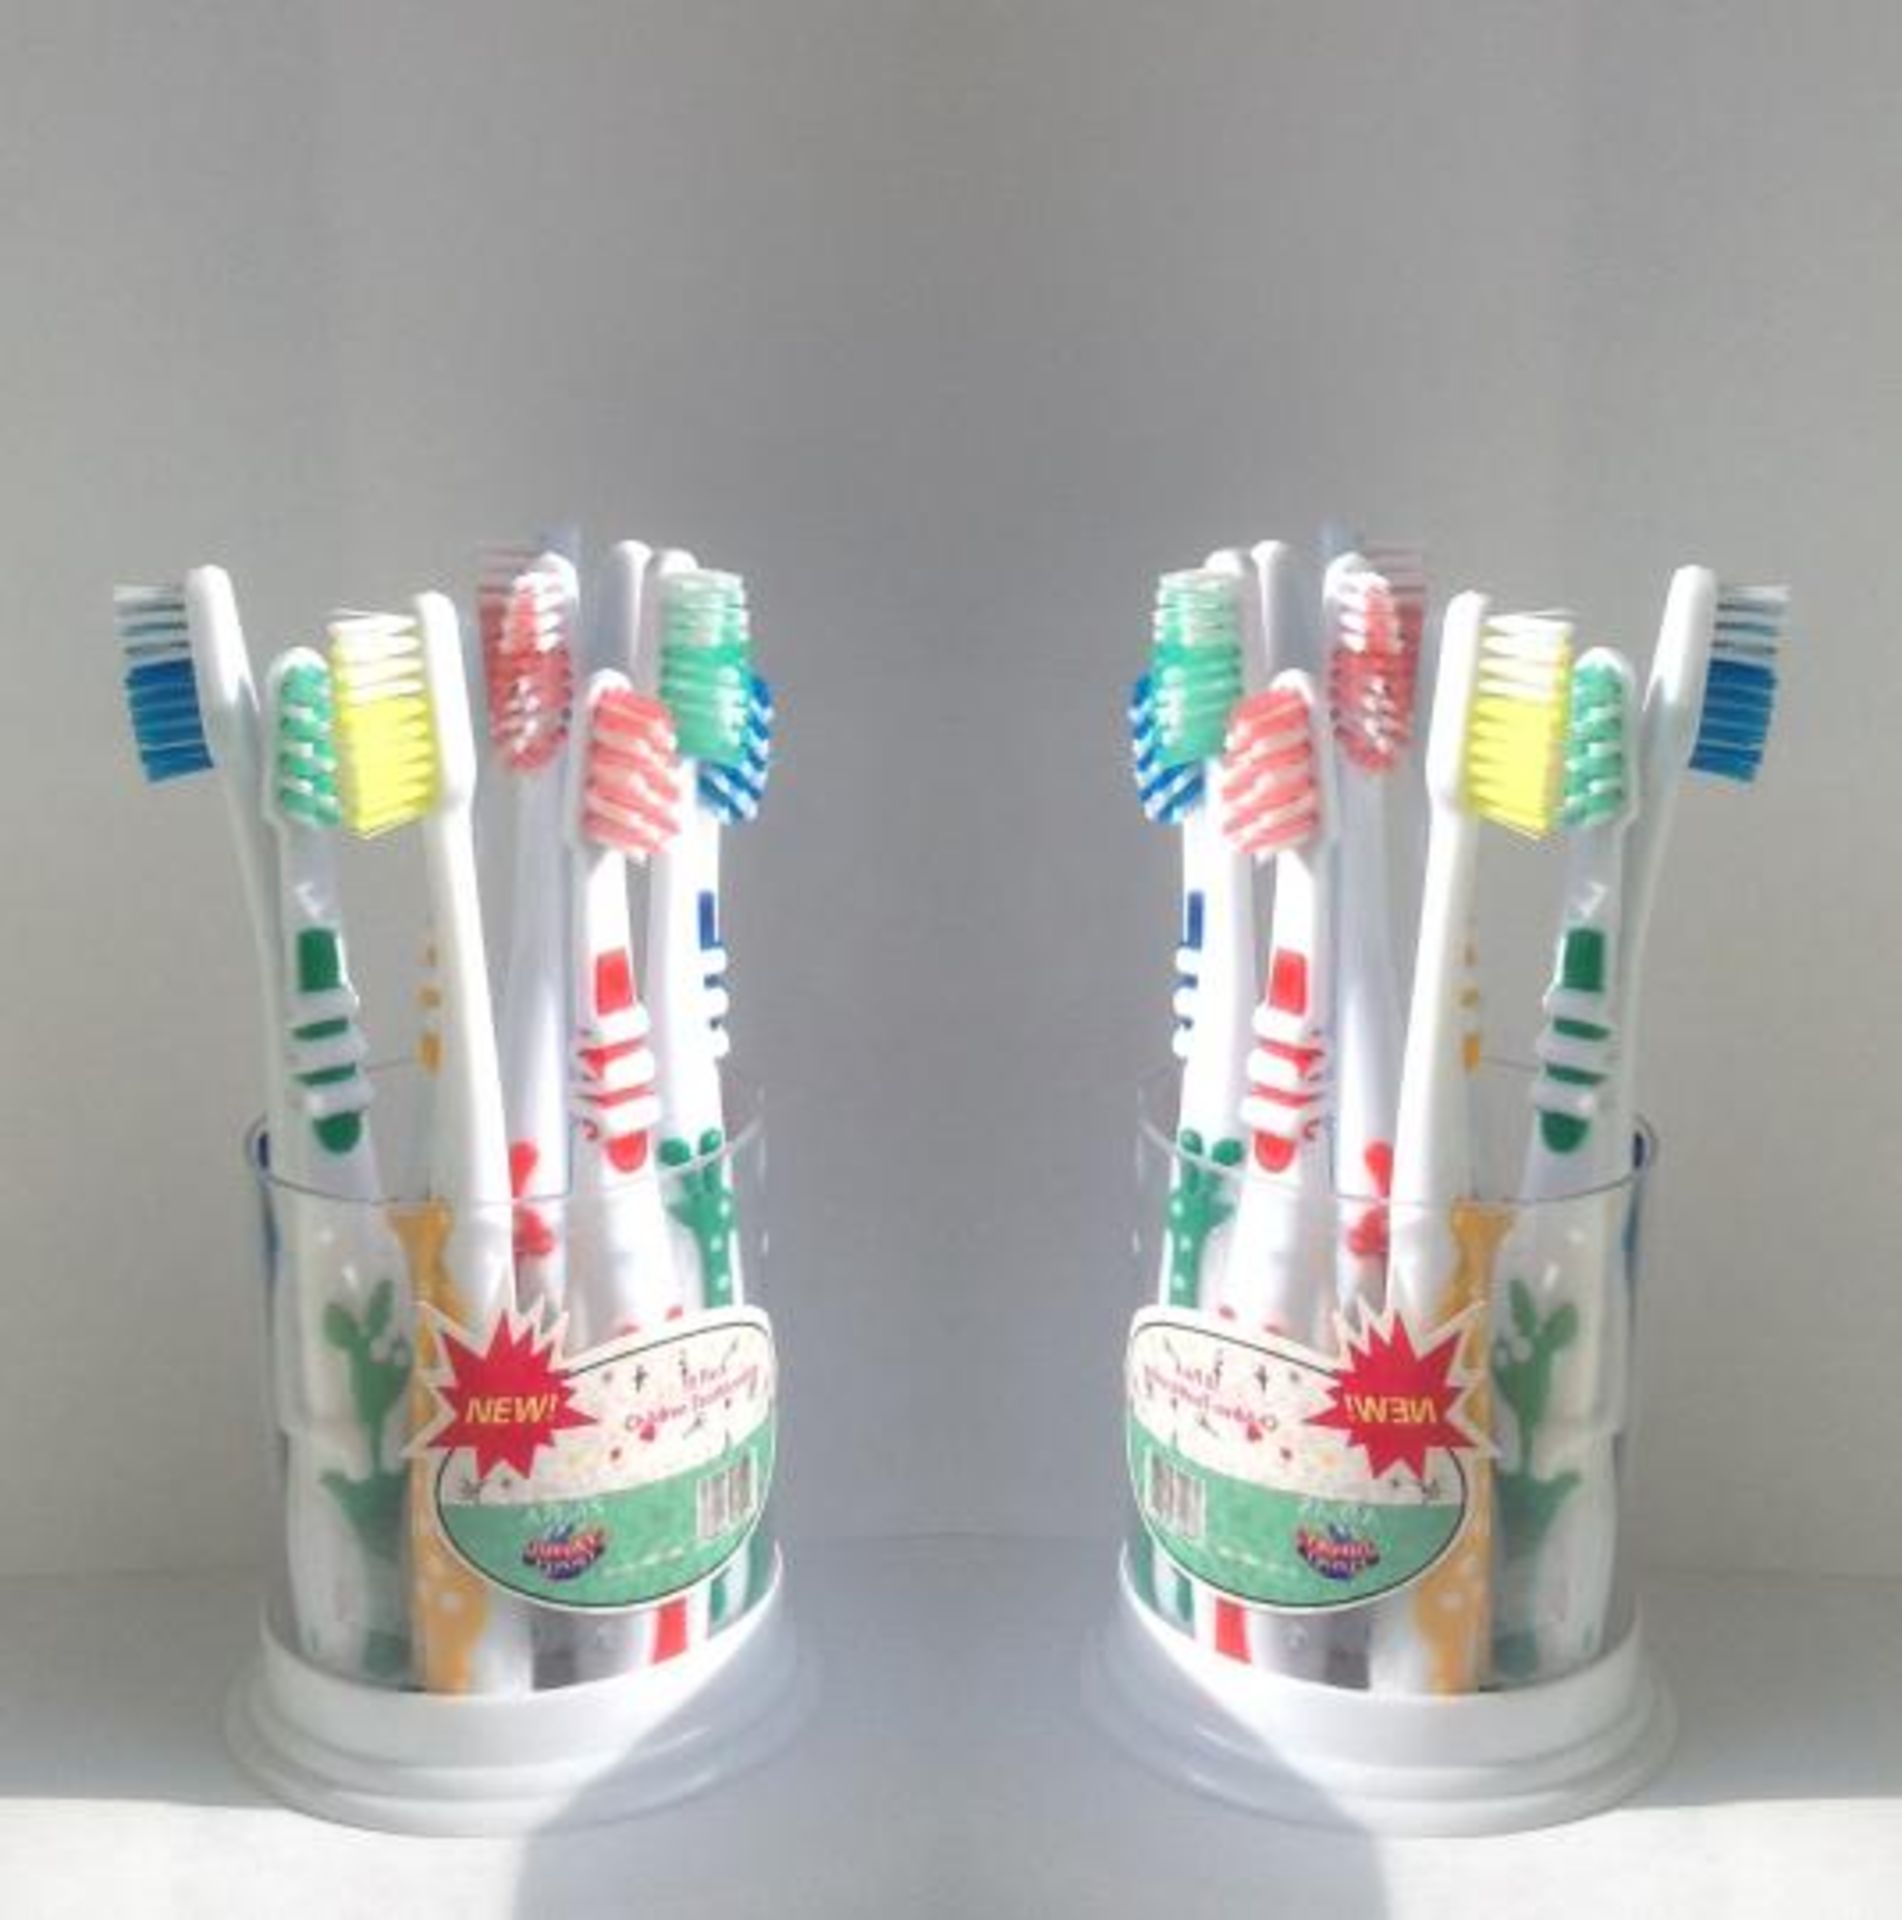 720 x Toothbrushes – in Displays -UK Delivery £20 -NO VAT